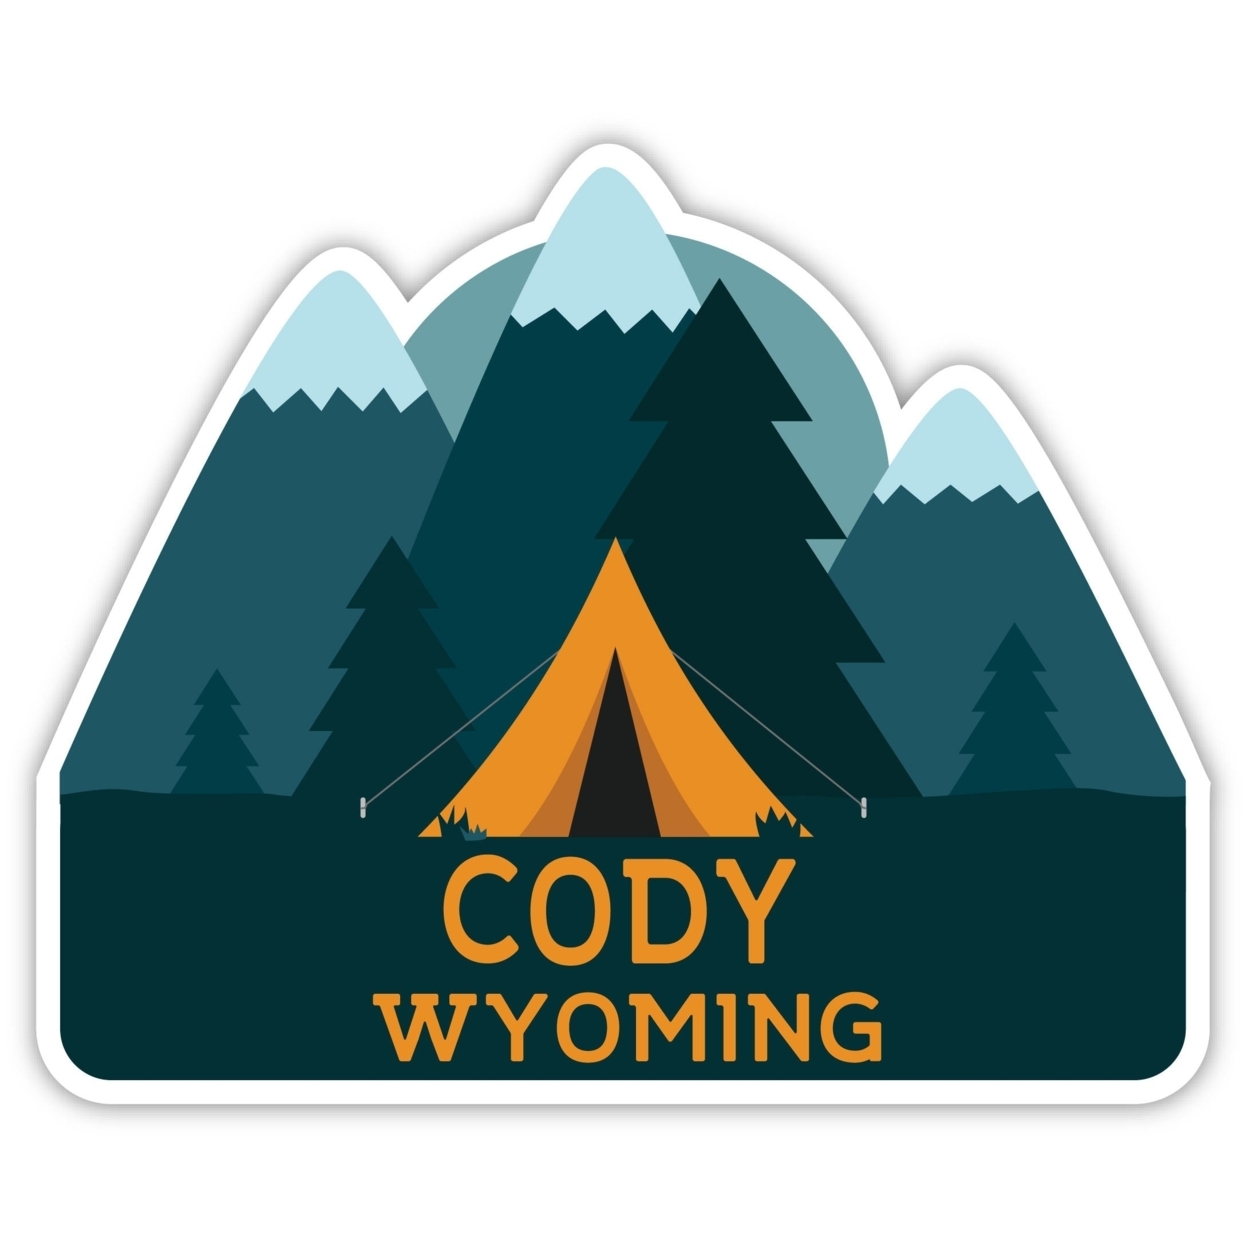 Cody Wyoming Souvenir Decorative Stickers (Choose Theme And Size) - Single Unit, 12-Inch, Tent